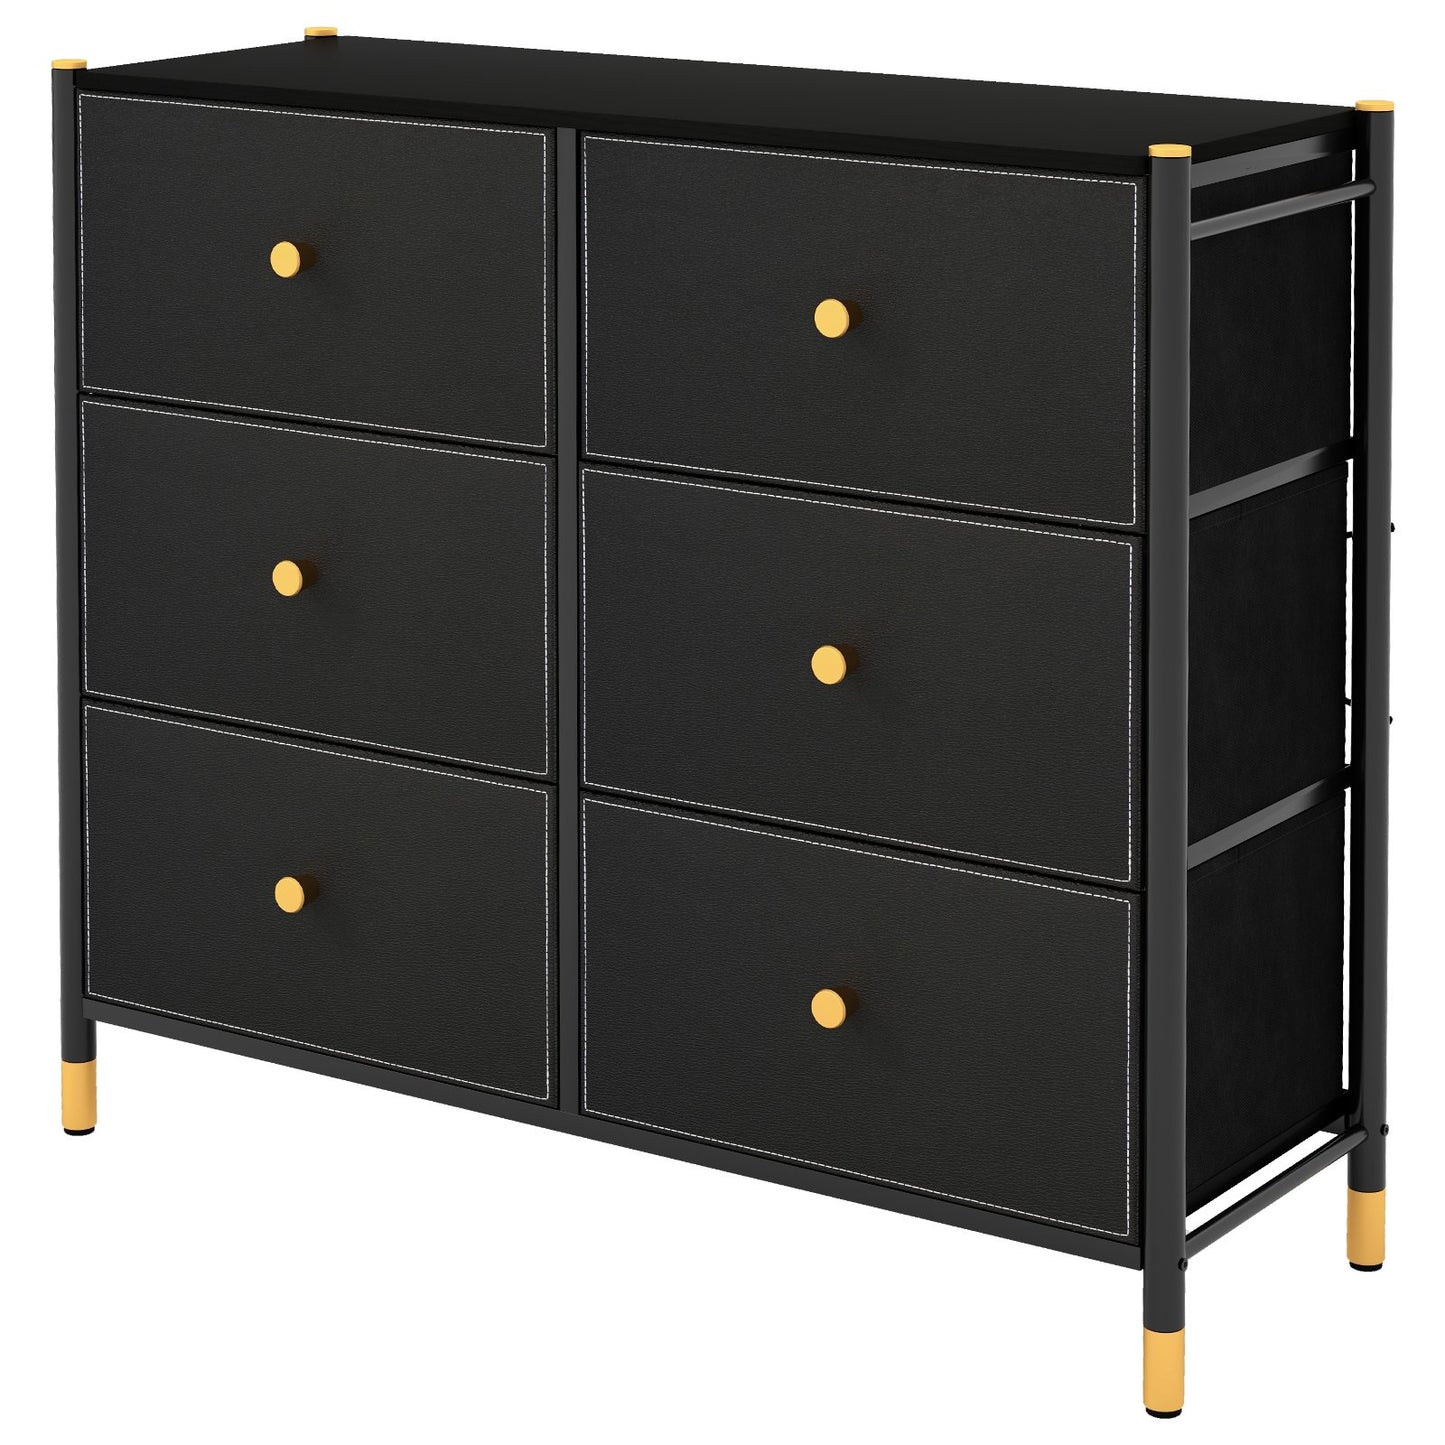 Floor Dresser Storage Organizer with 5/6/8 Drawers with Fabric Bins and Metal Frame-6-Drawer, Black